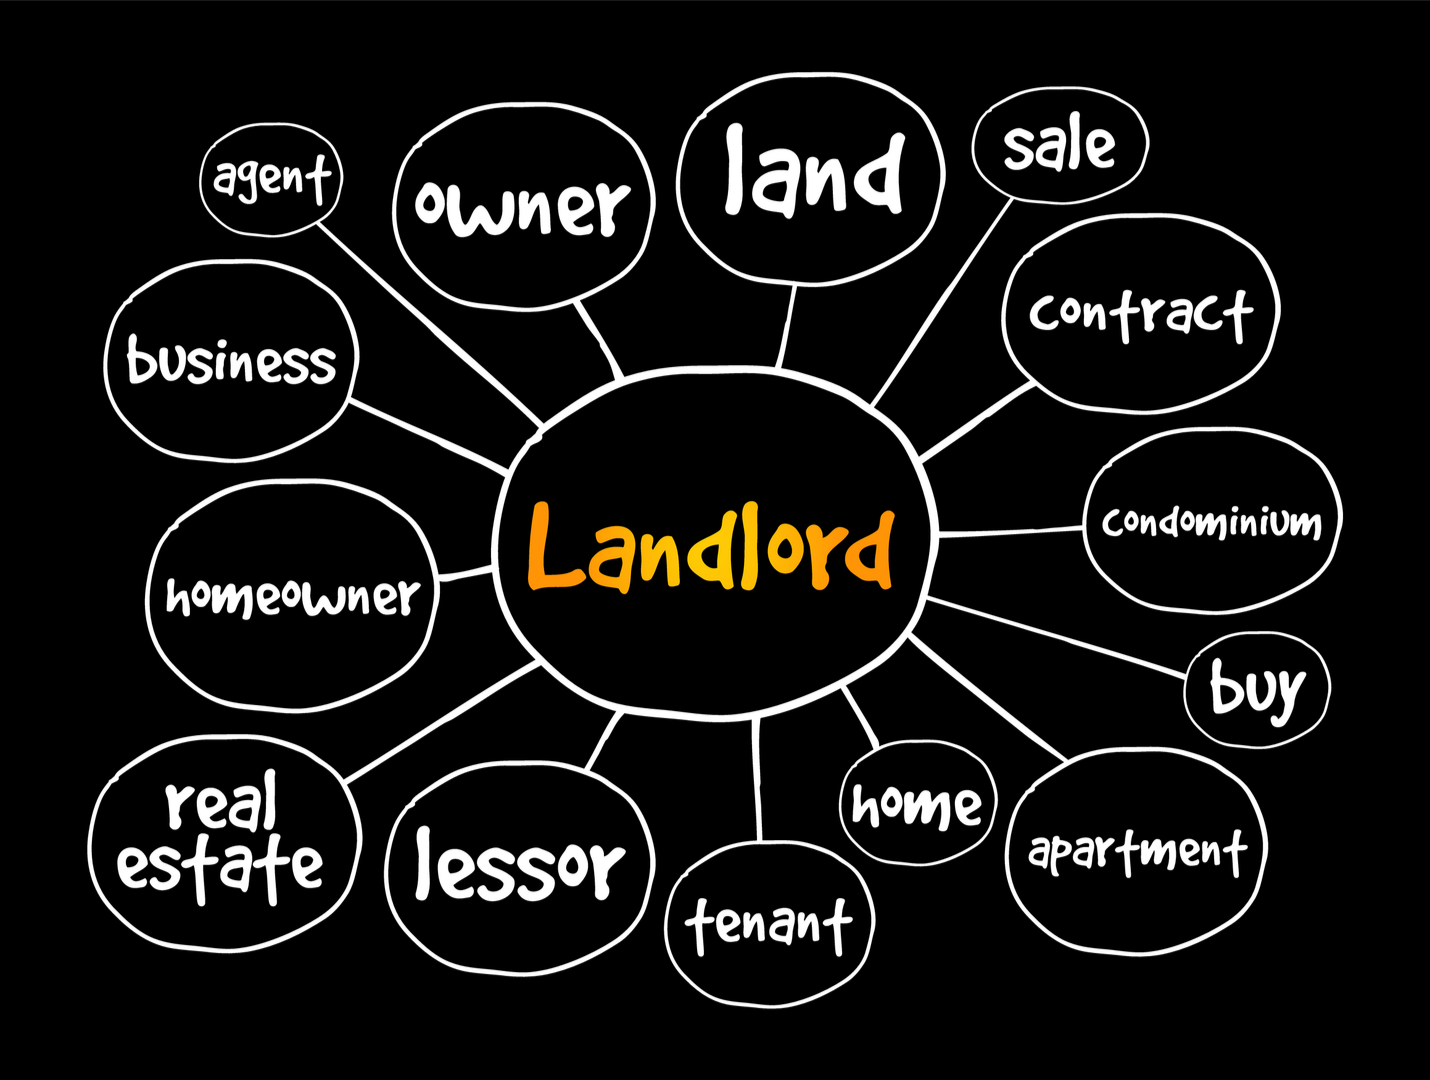 a diagram with the word Landlord on the center linking to other circles around it with other words such as owner, lesser, contract, tenant, land, real estate, etc.